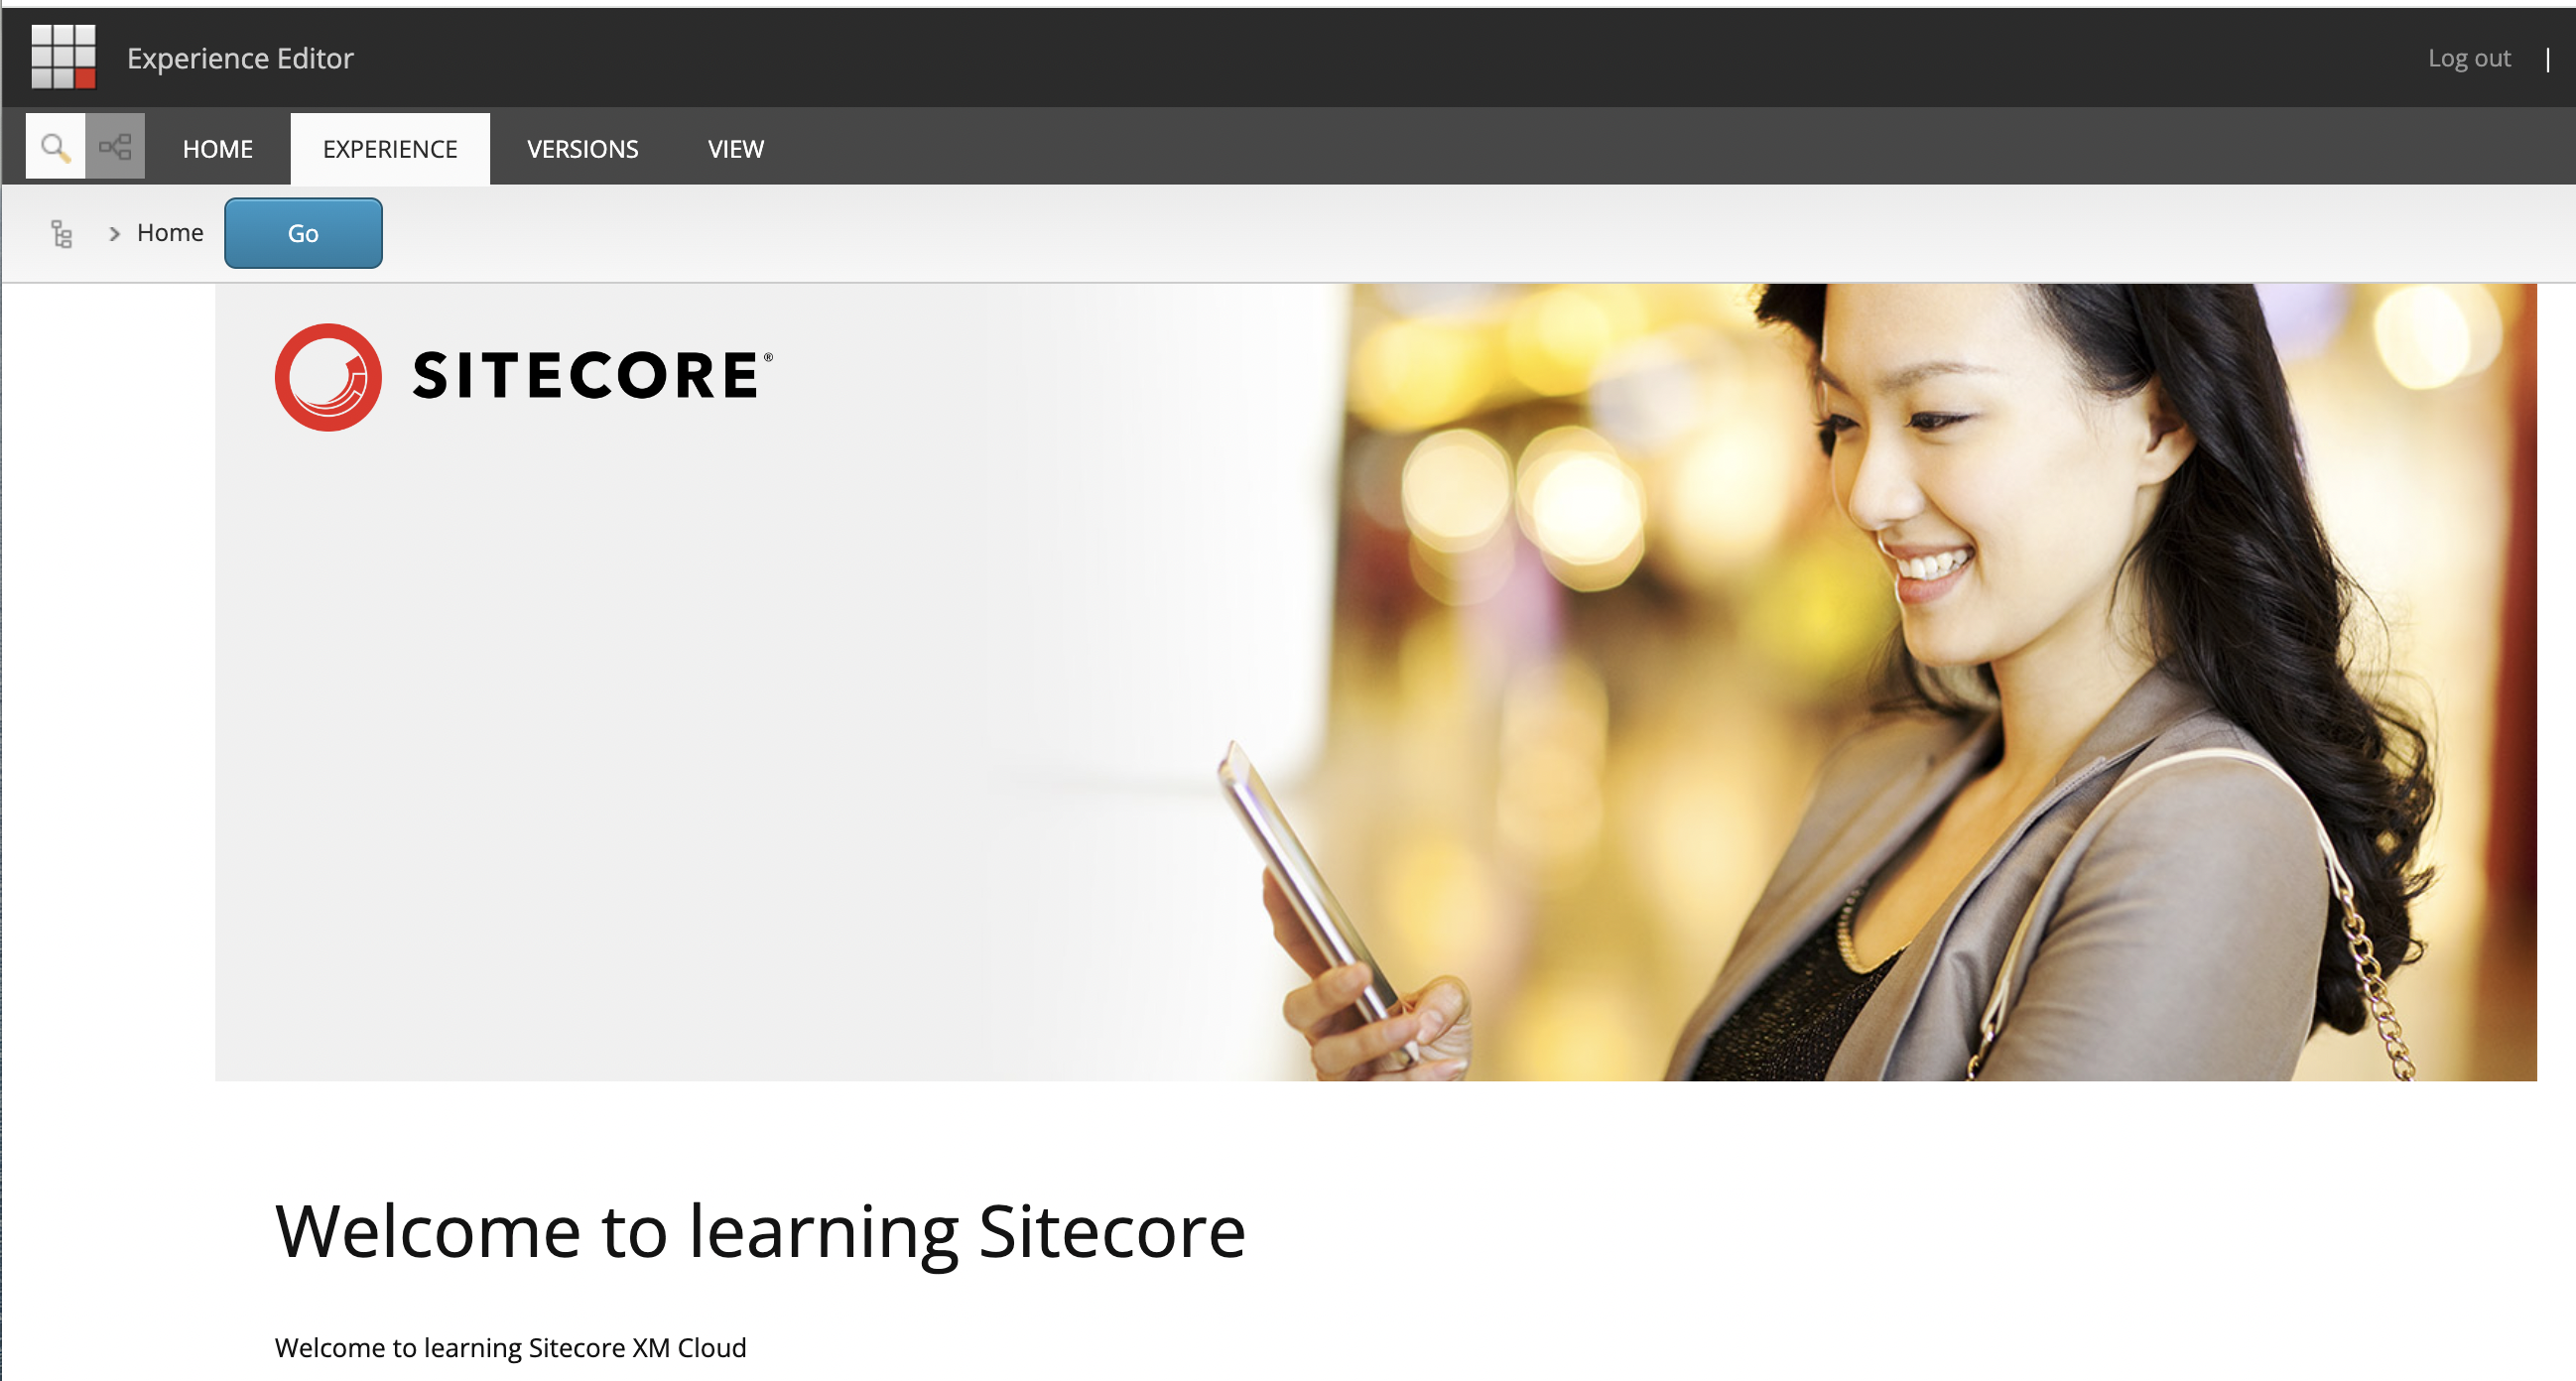 Screenshot from Sitecore accessing a page with content to display the new language